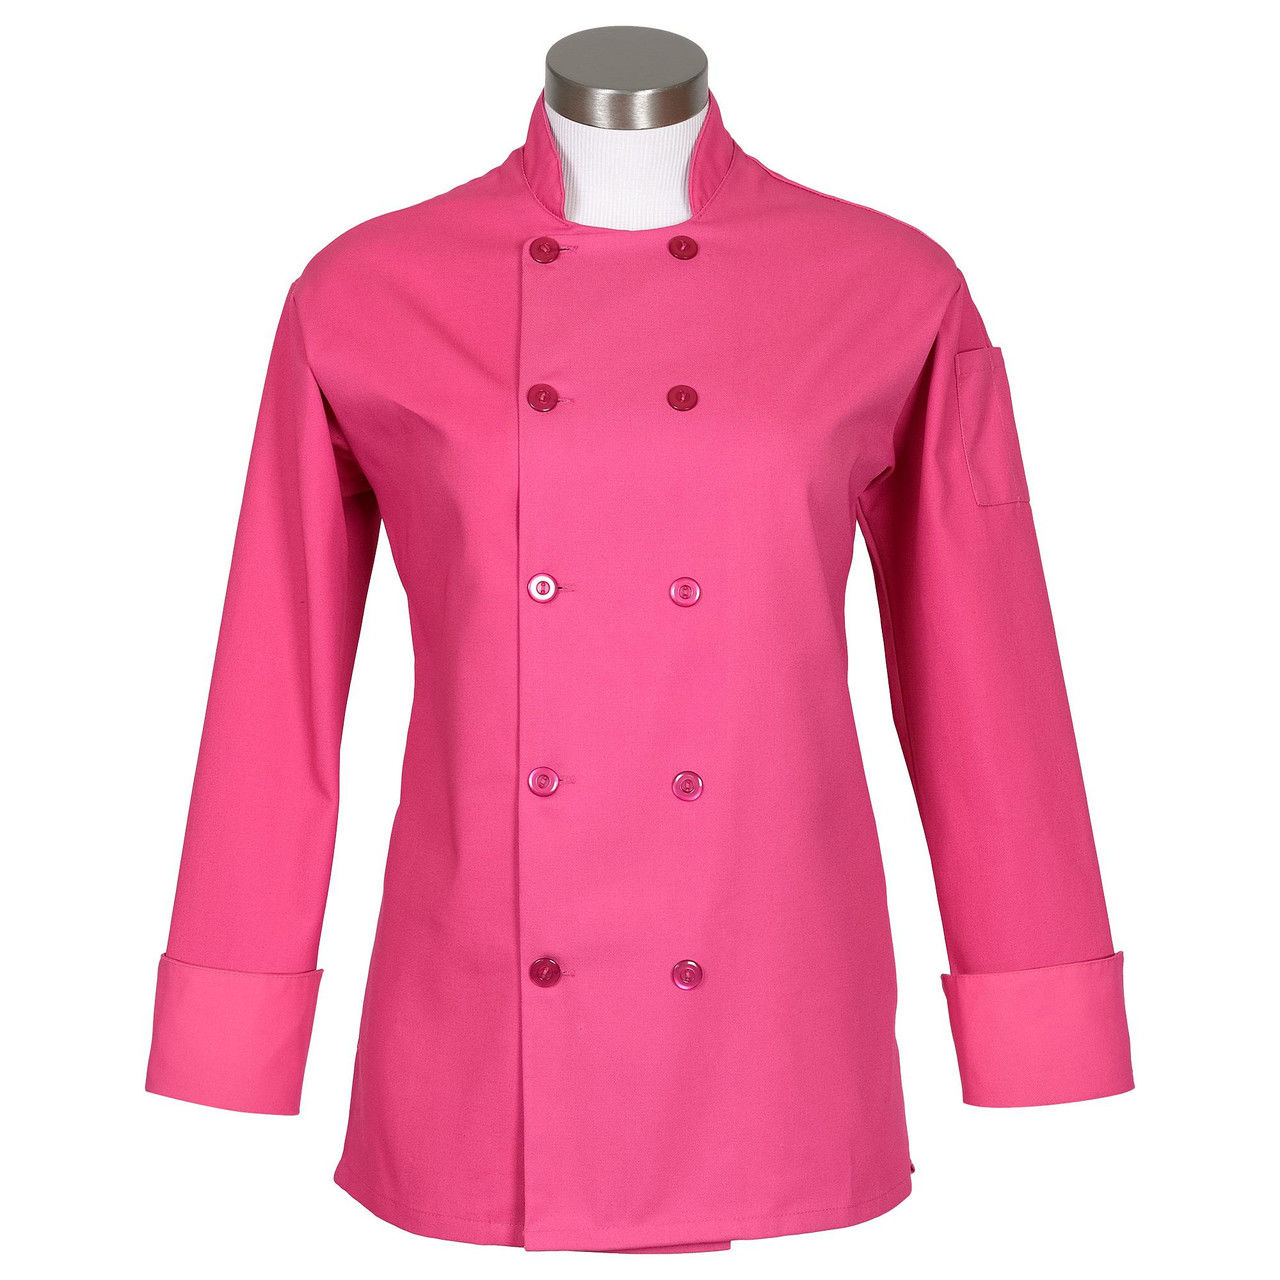 What is the style of these chef coats for women with long sleeves?